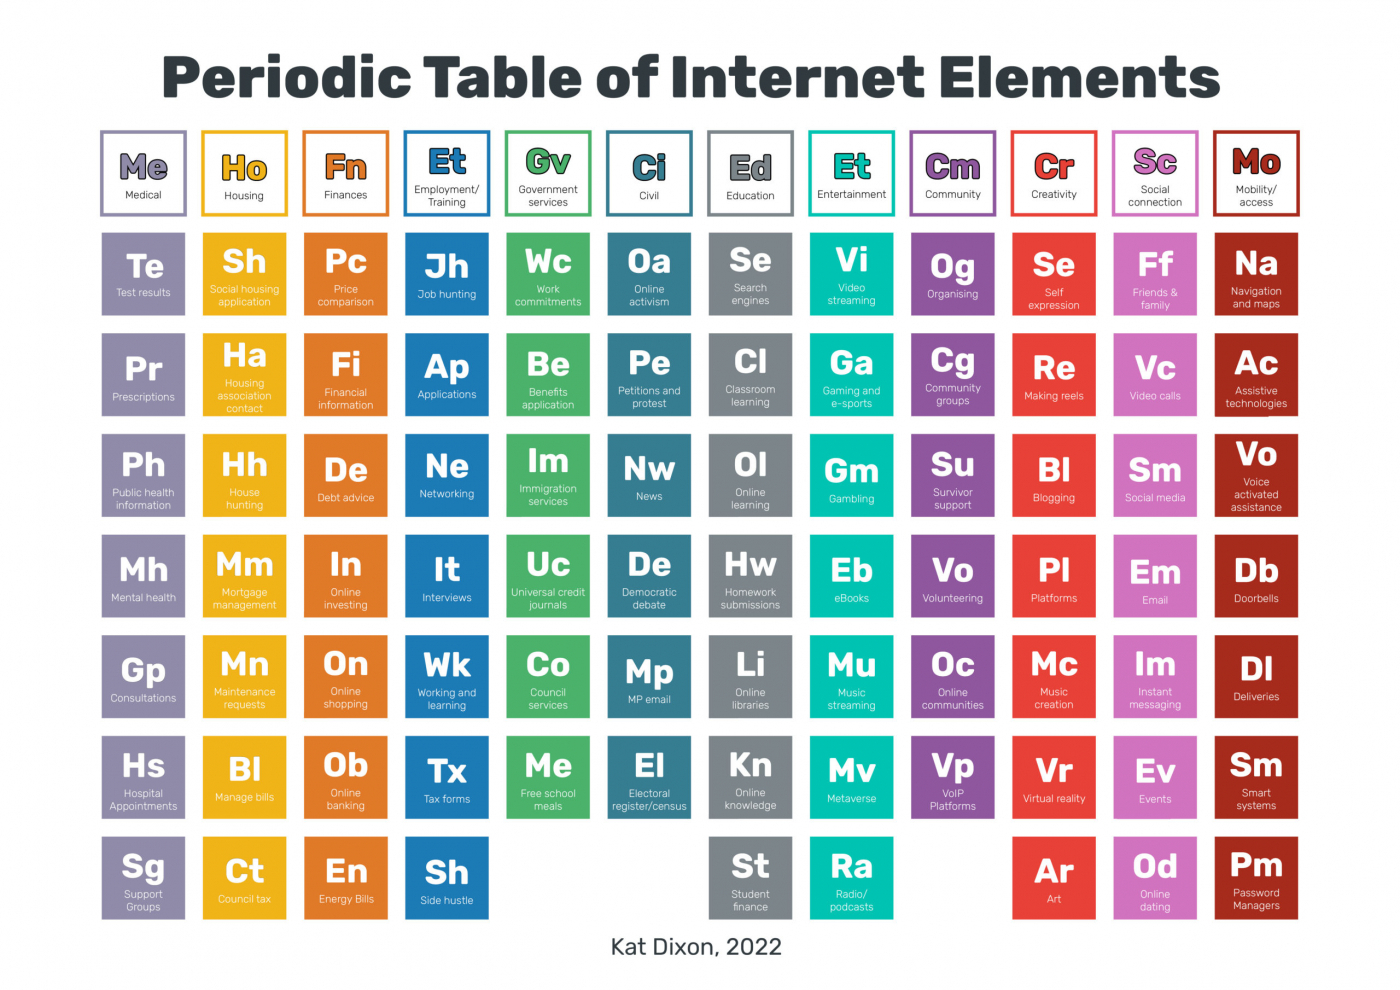 A graphical representation of the periodic table which includes descriptions of digital capabilities rather than chemical elements